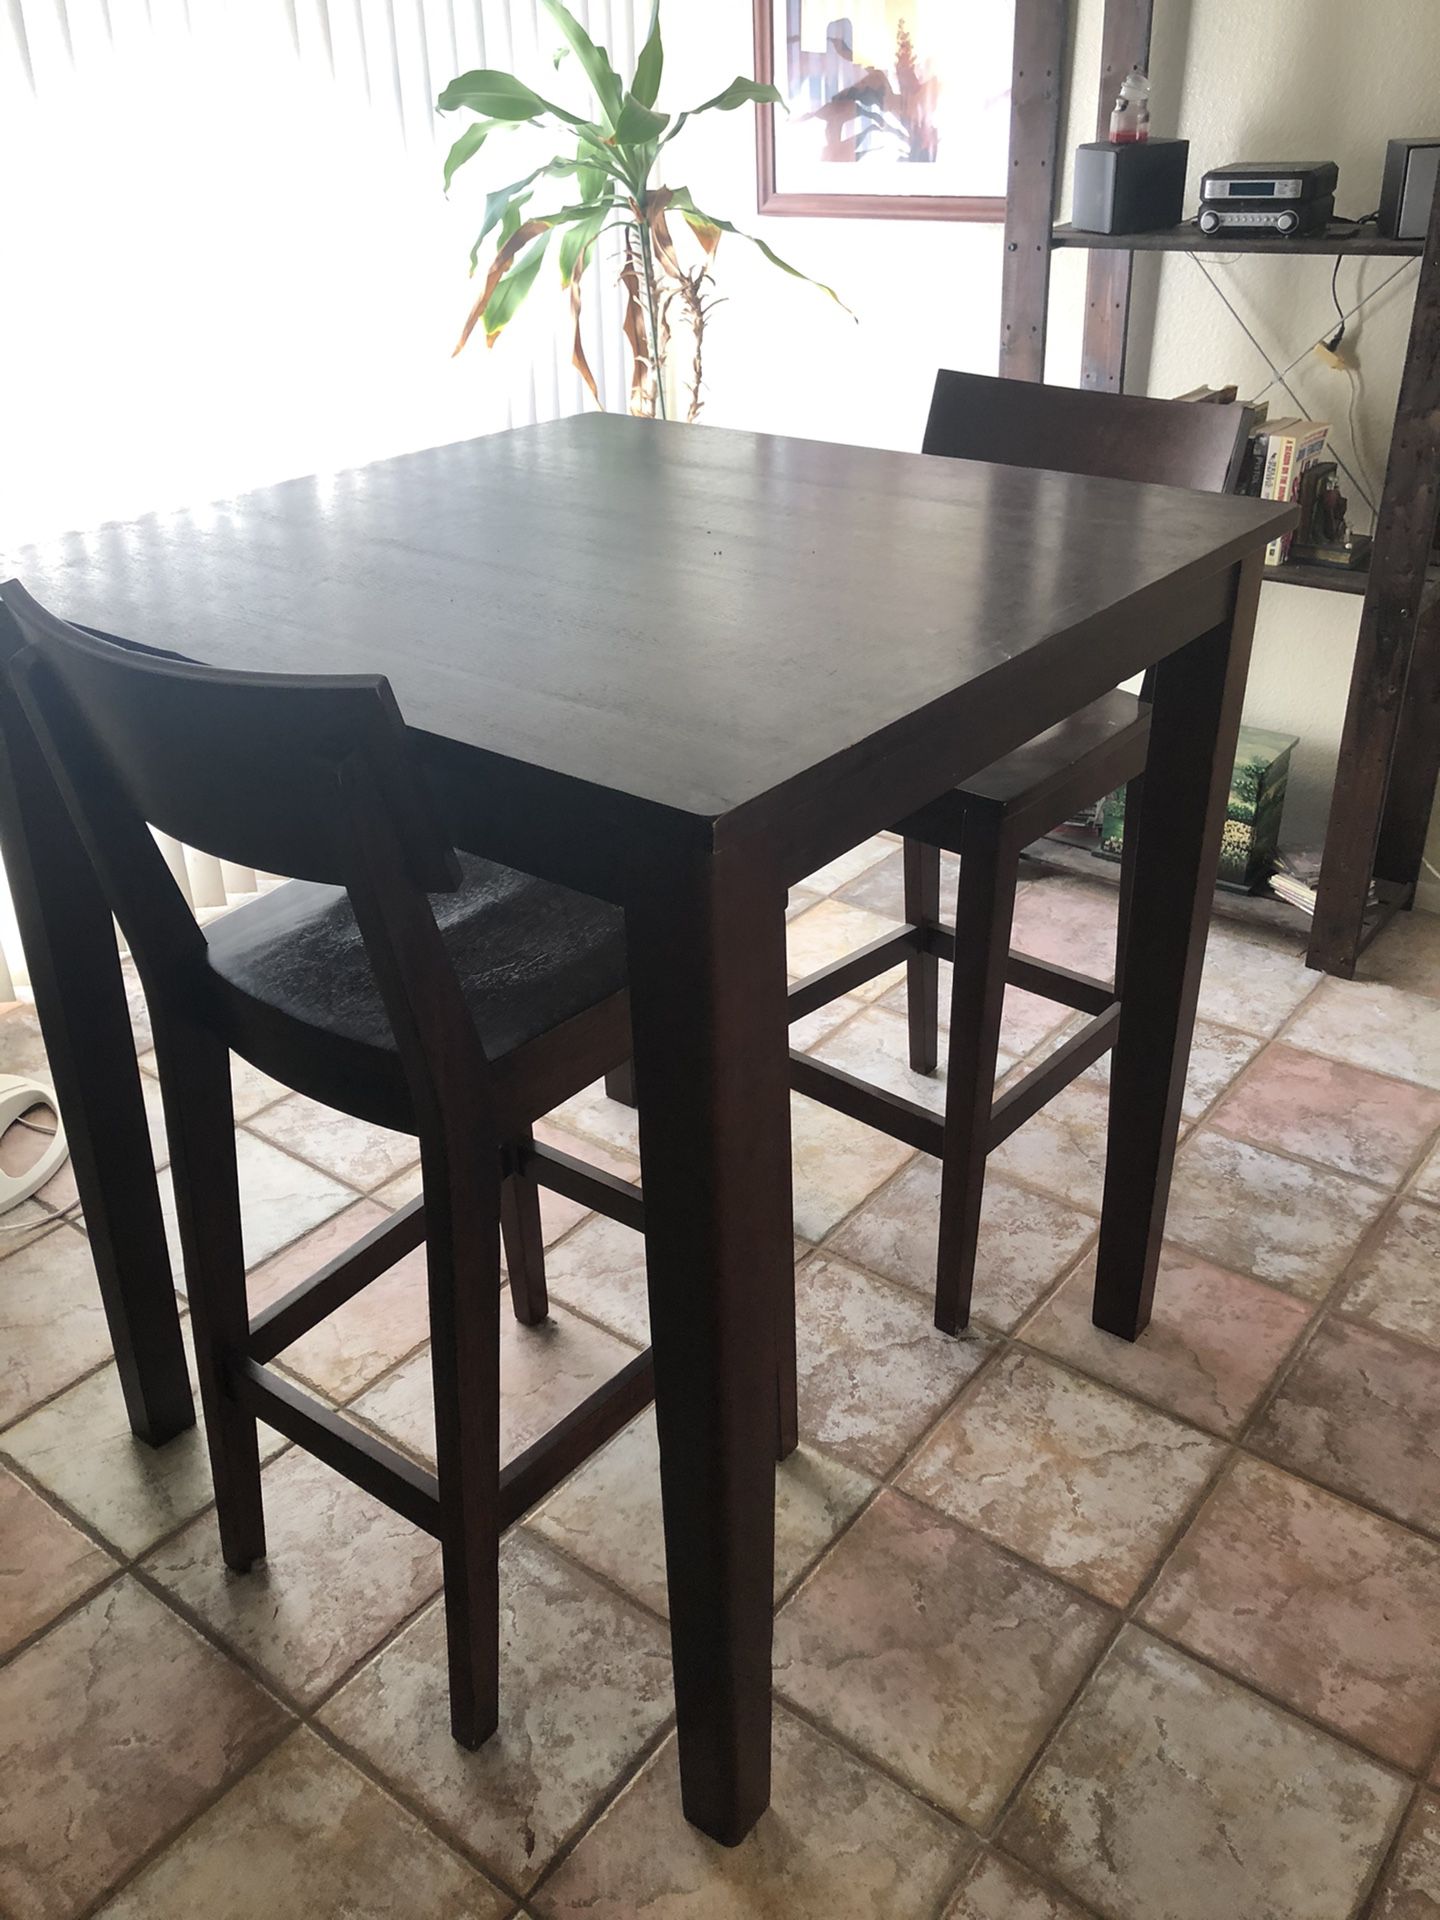 High top kitchen table & 2 chairs.